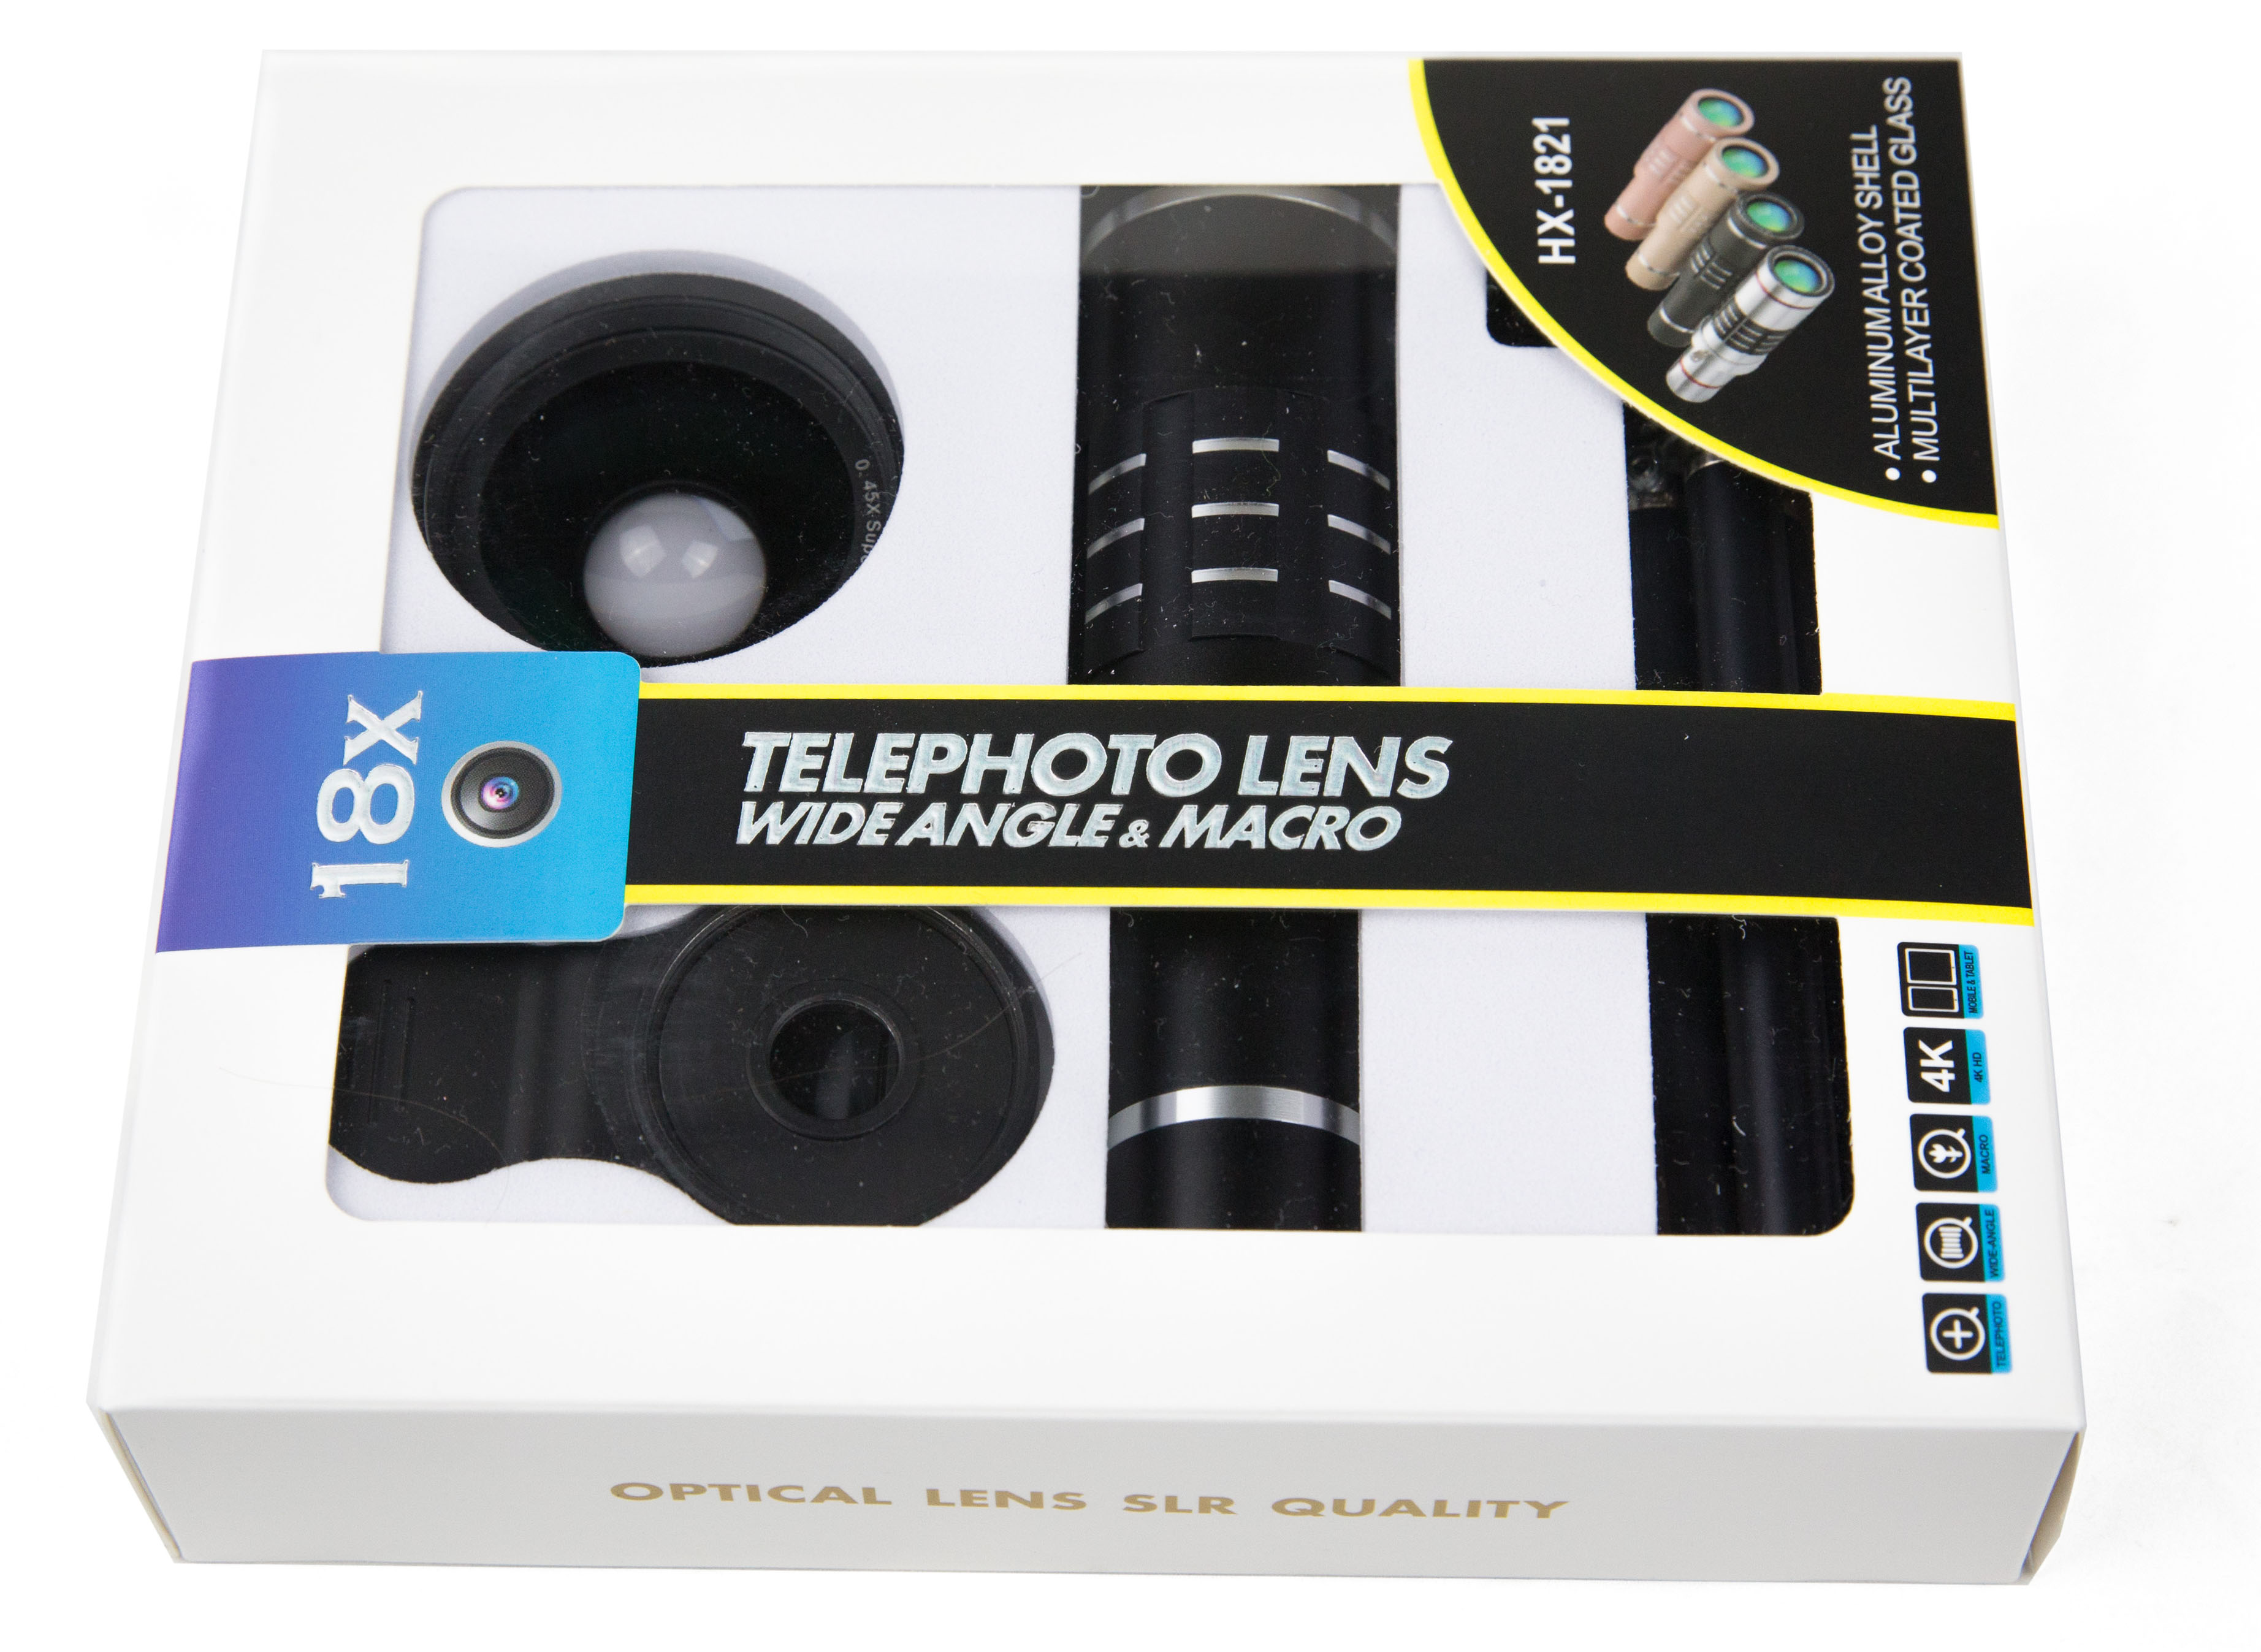 R&L Telephoto Lens for Smartphone, Mobile Camera Kit with 12X Telephoto, Wide Angle and Macro Lenses 3 in 1 - image 2 of 7